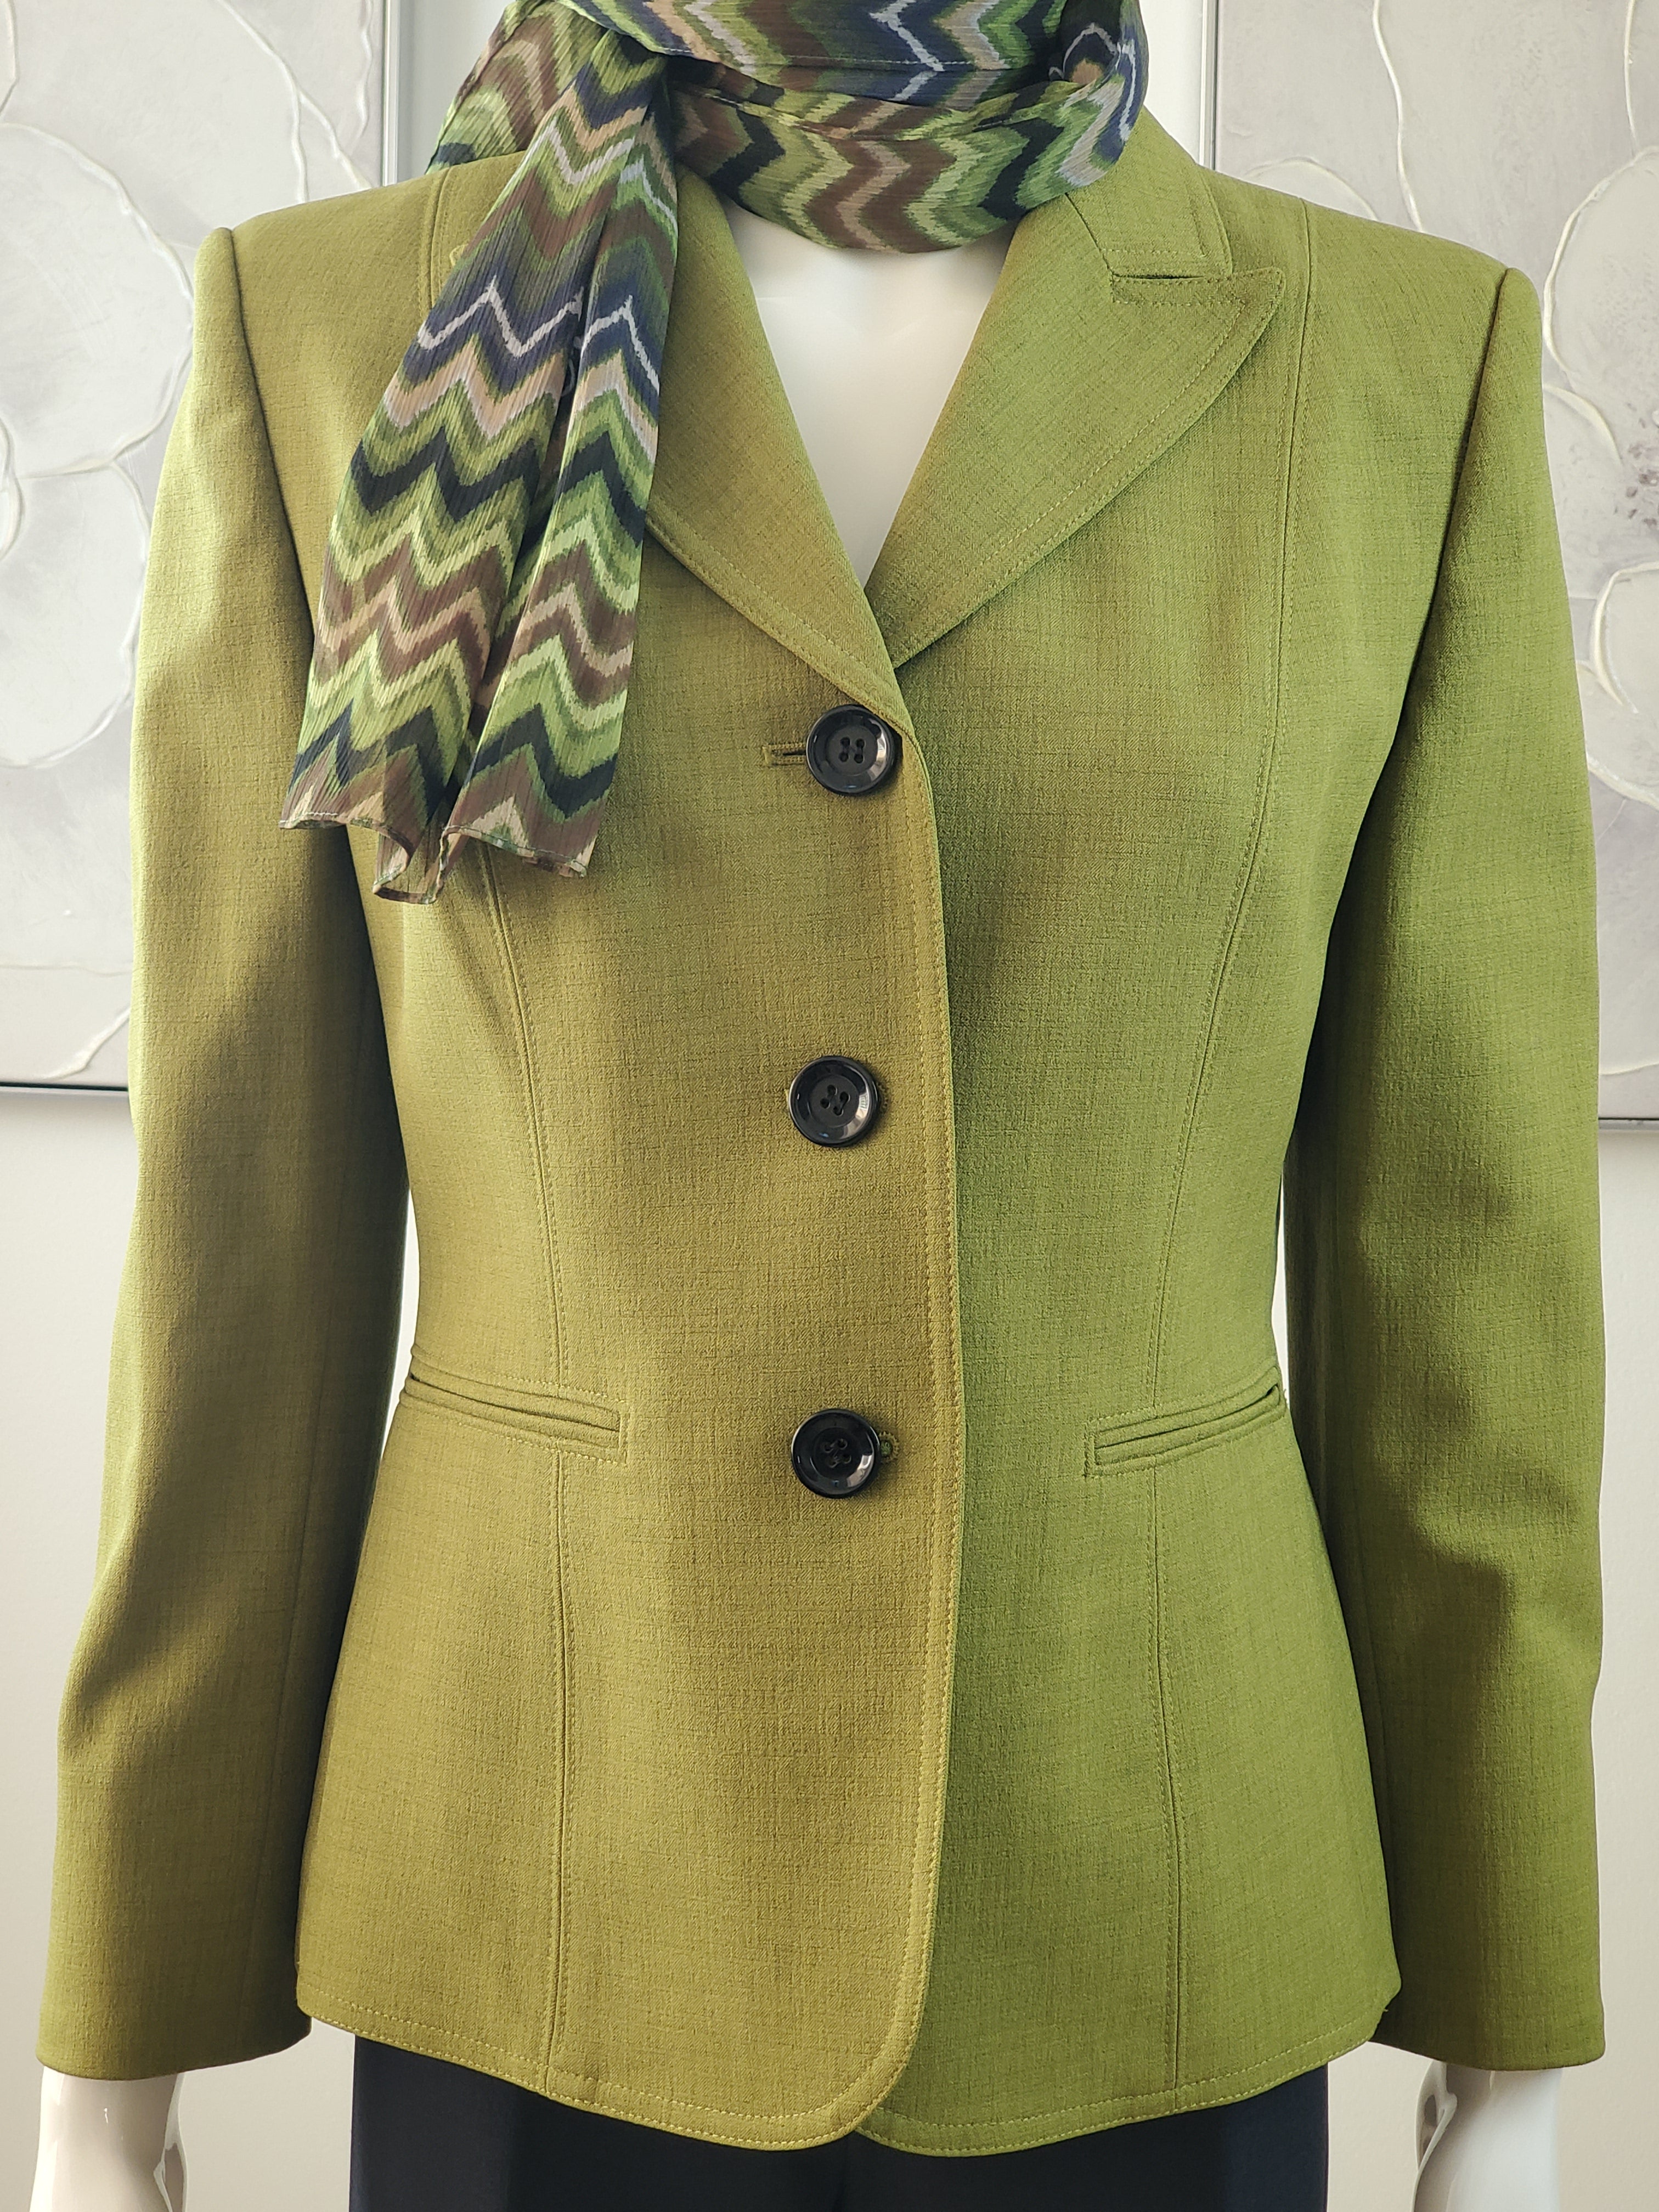 Women's Green and Blue Suit